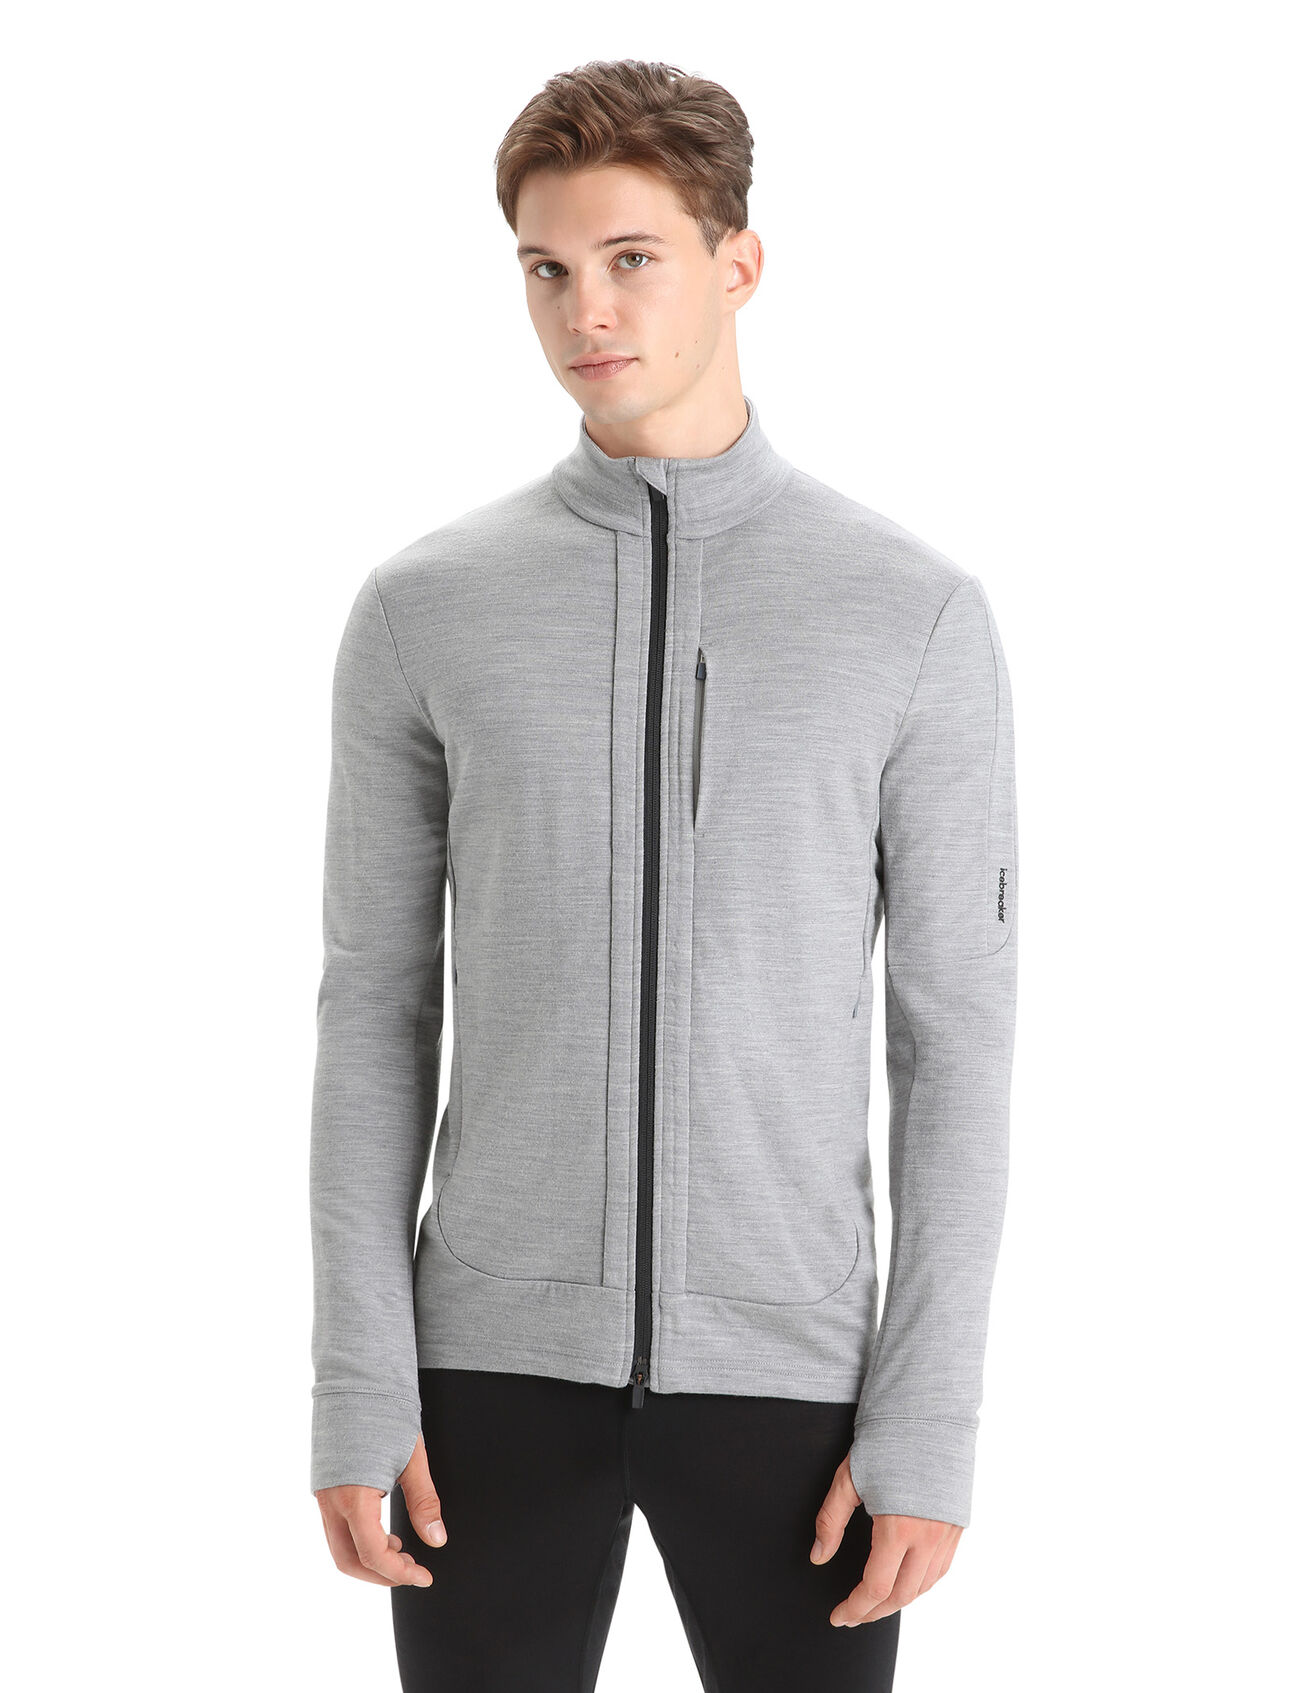 Mens Merino Quantum III Long Sleeve Zip Jacket A 100% merino wool mid layer ideal for technical mountain adventures, the Quantum III Long Sleeve Zip helps regulate your body temperature when you're on the move.